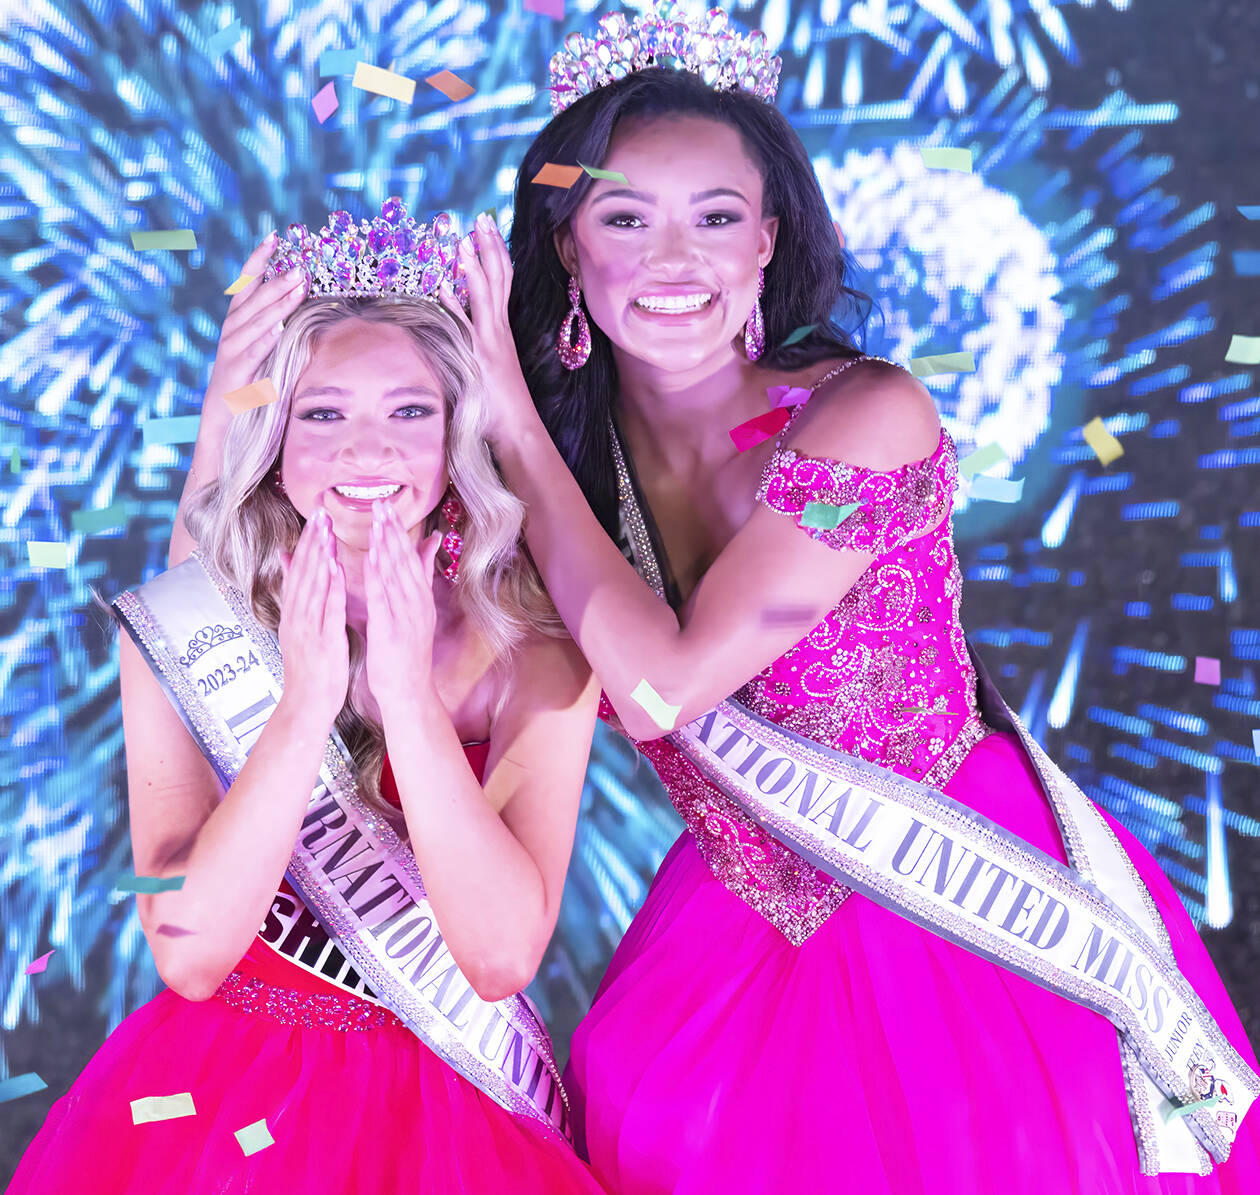 Catherine Feihn courtesy photo
Kendall Runyan, left, is stunned as she is crowned on stage.